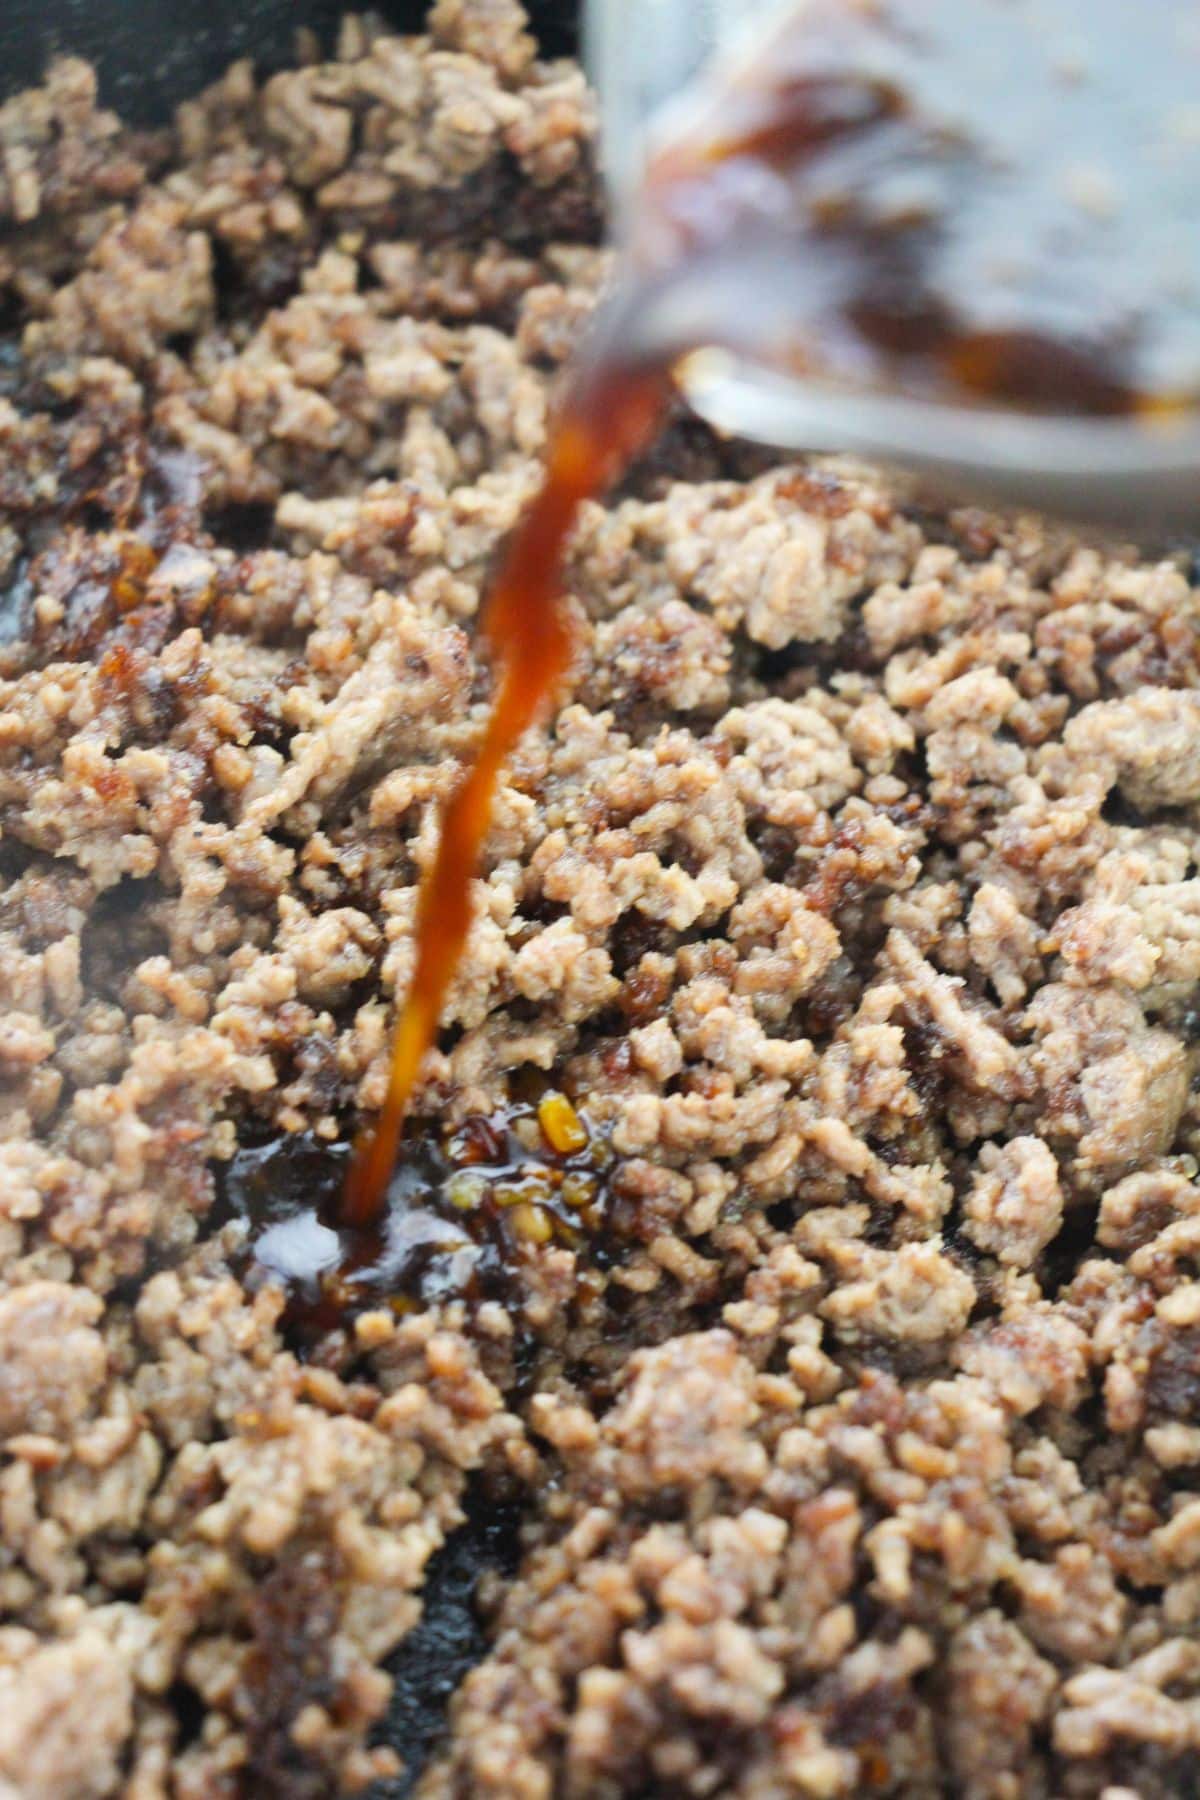 A sauce mixture is being poured in the beef.